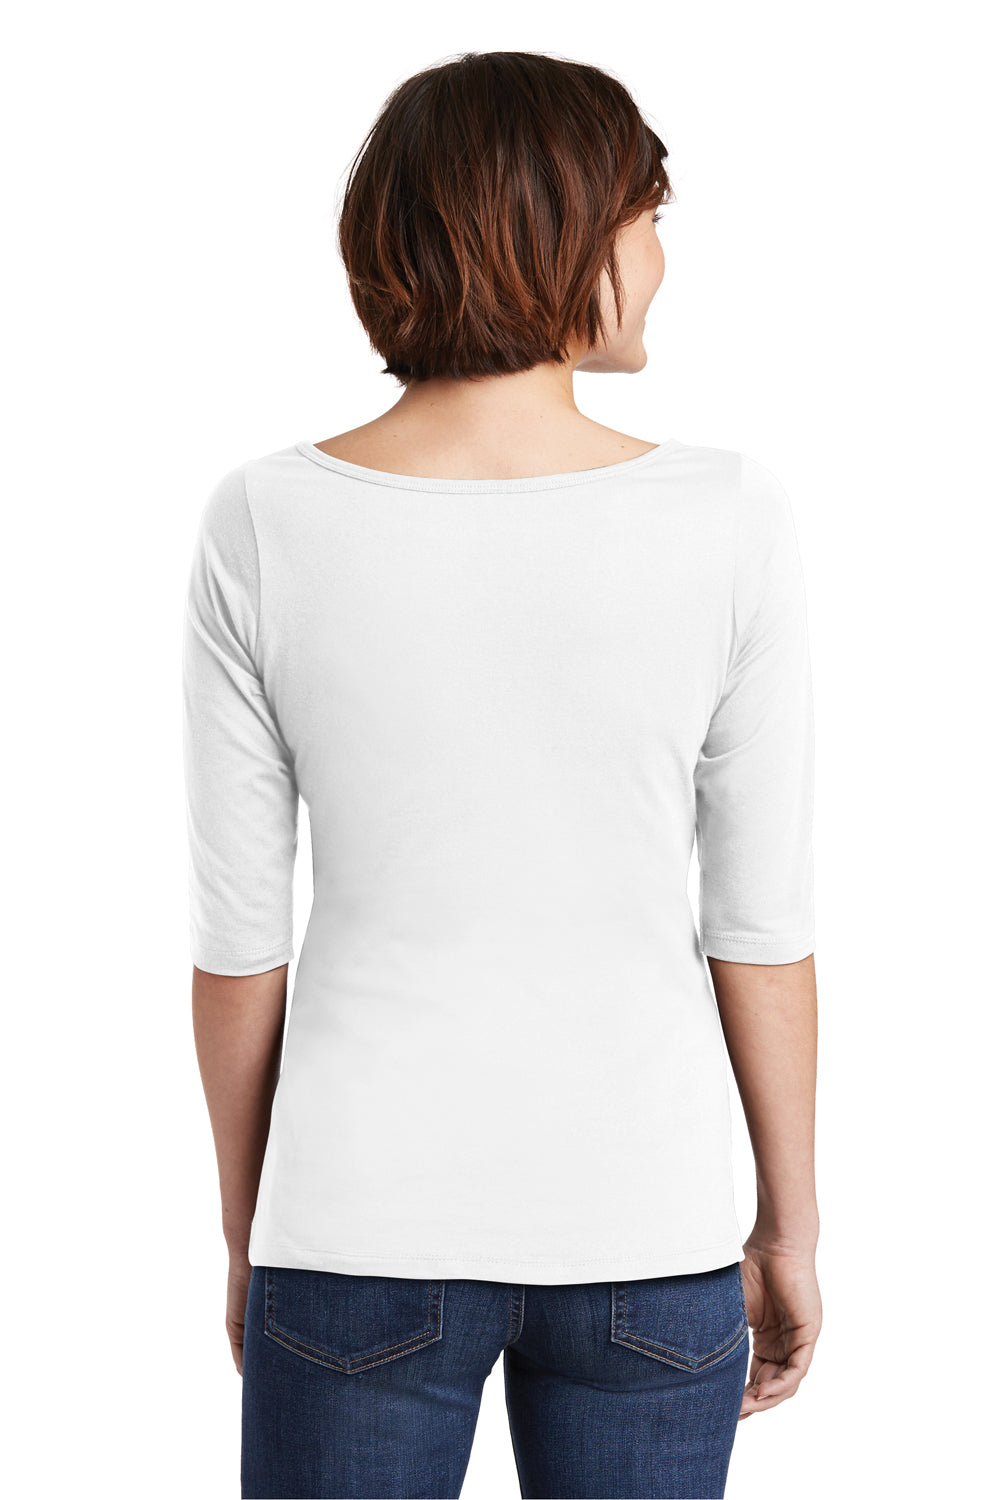 District DM107L Womens Perfect Weight 3/4 Sleeve T-Shirt White Back